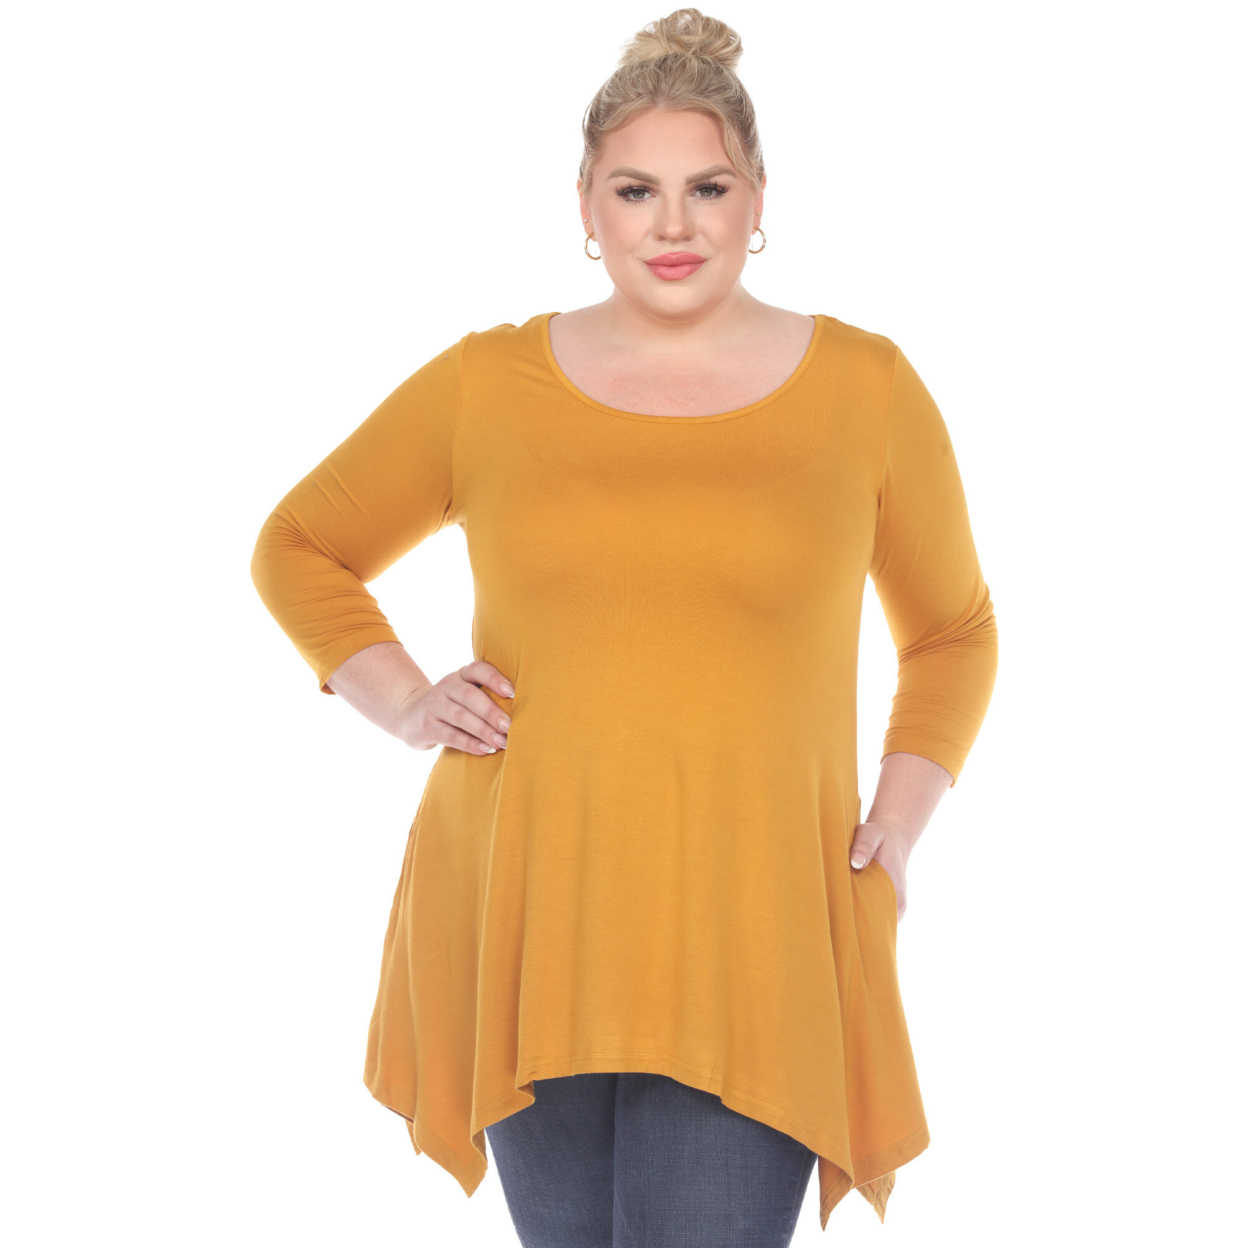 White Mark Women's Quarter Sleeve Tunic Top With Pockets - Mustard, 4X